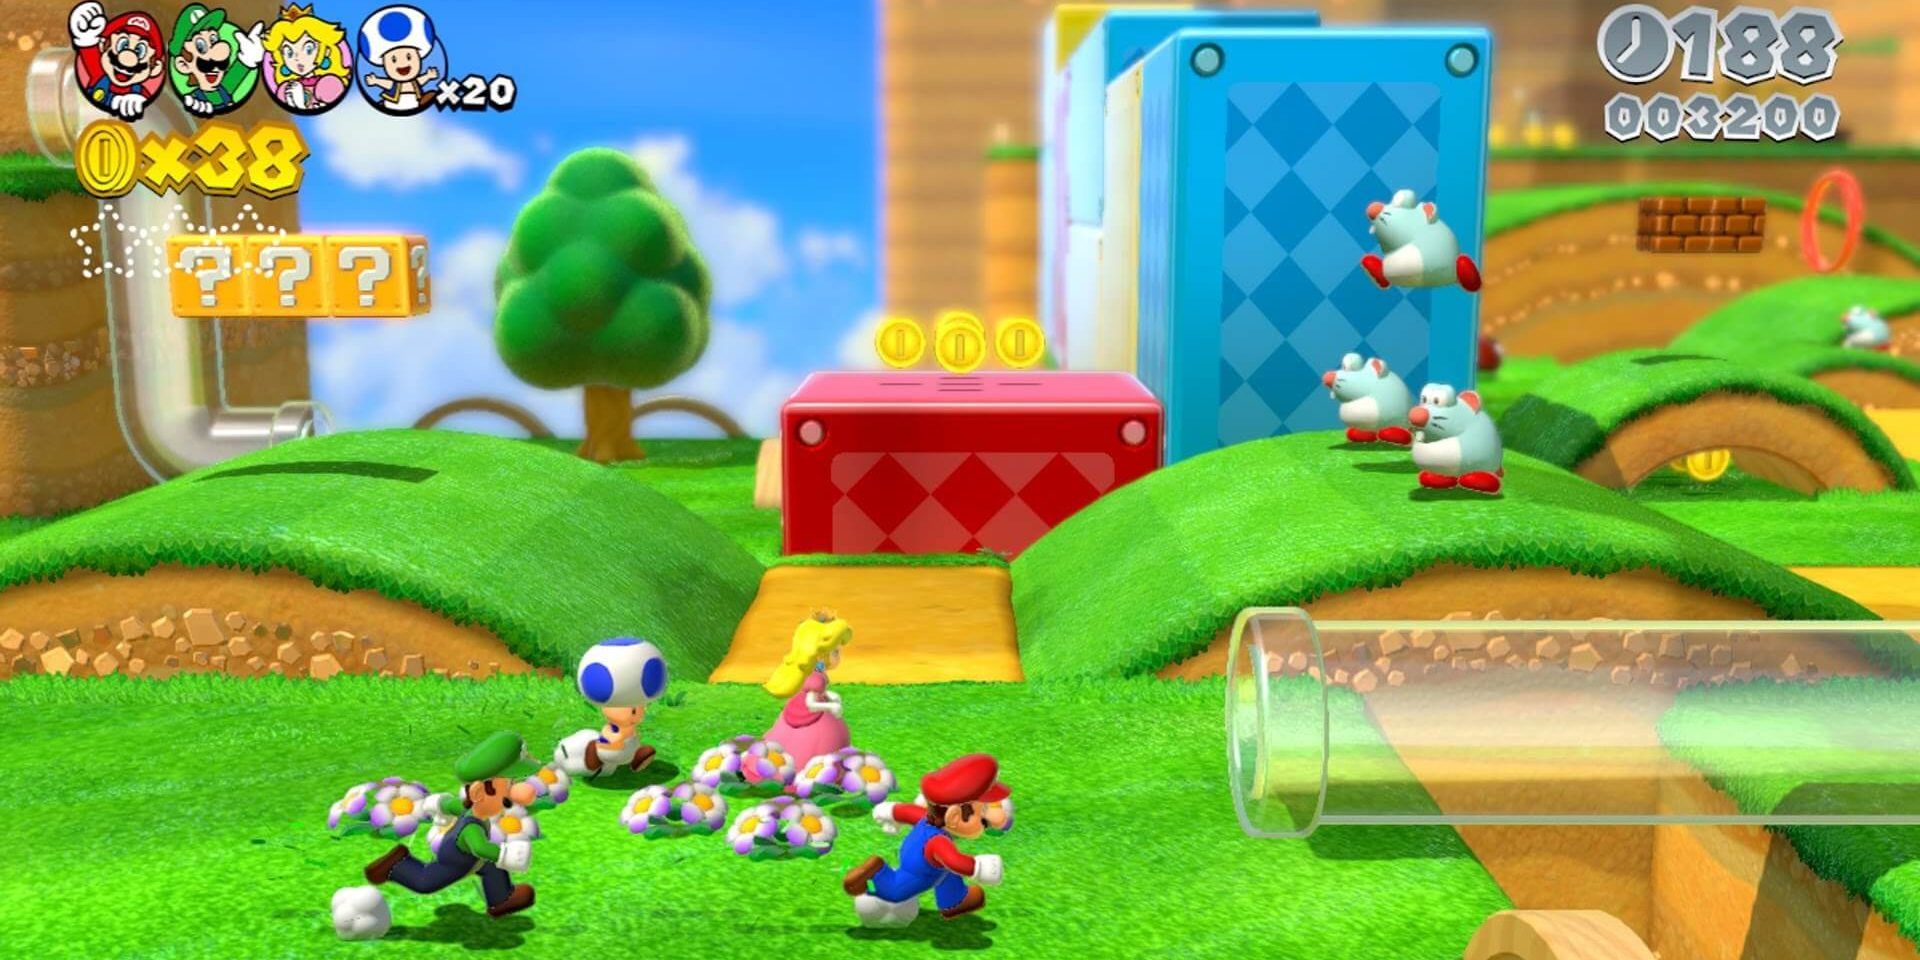 An early level in Super Mario 3D World